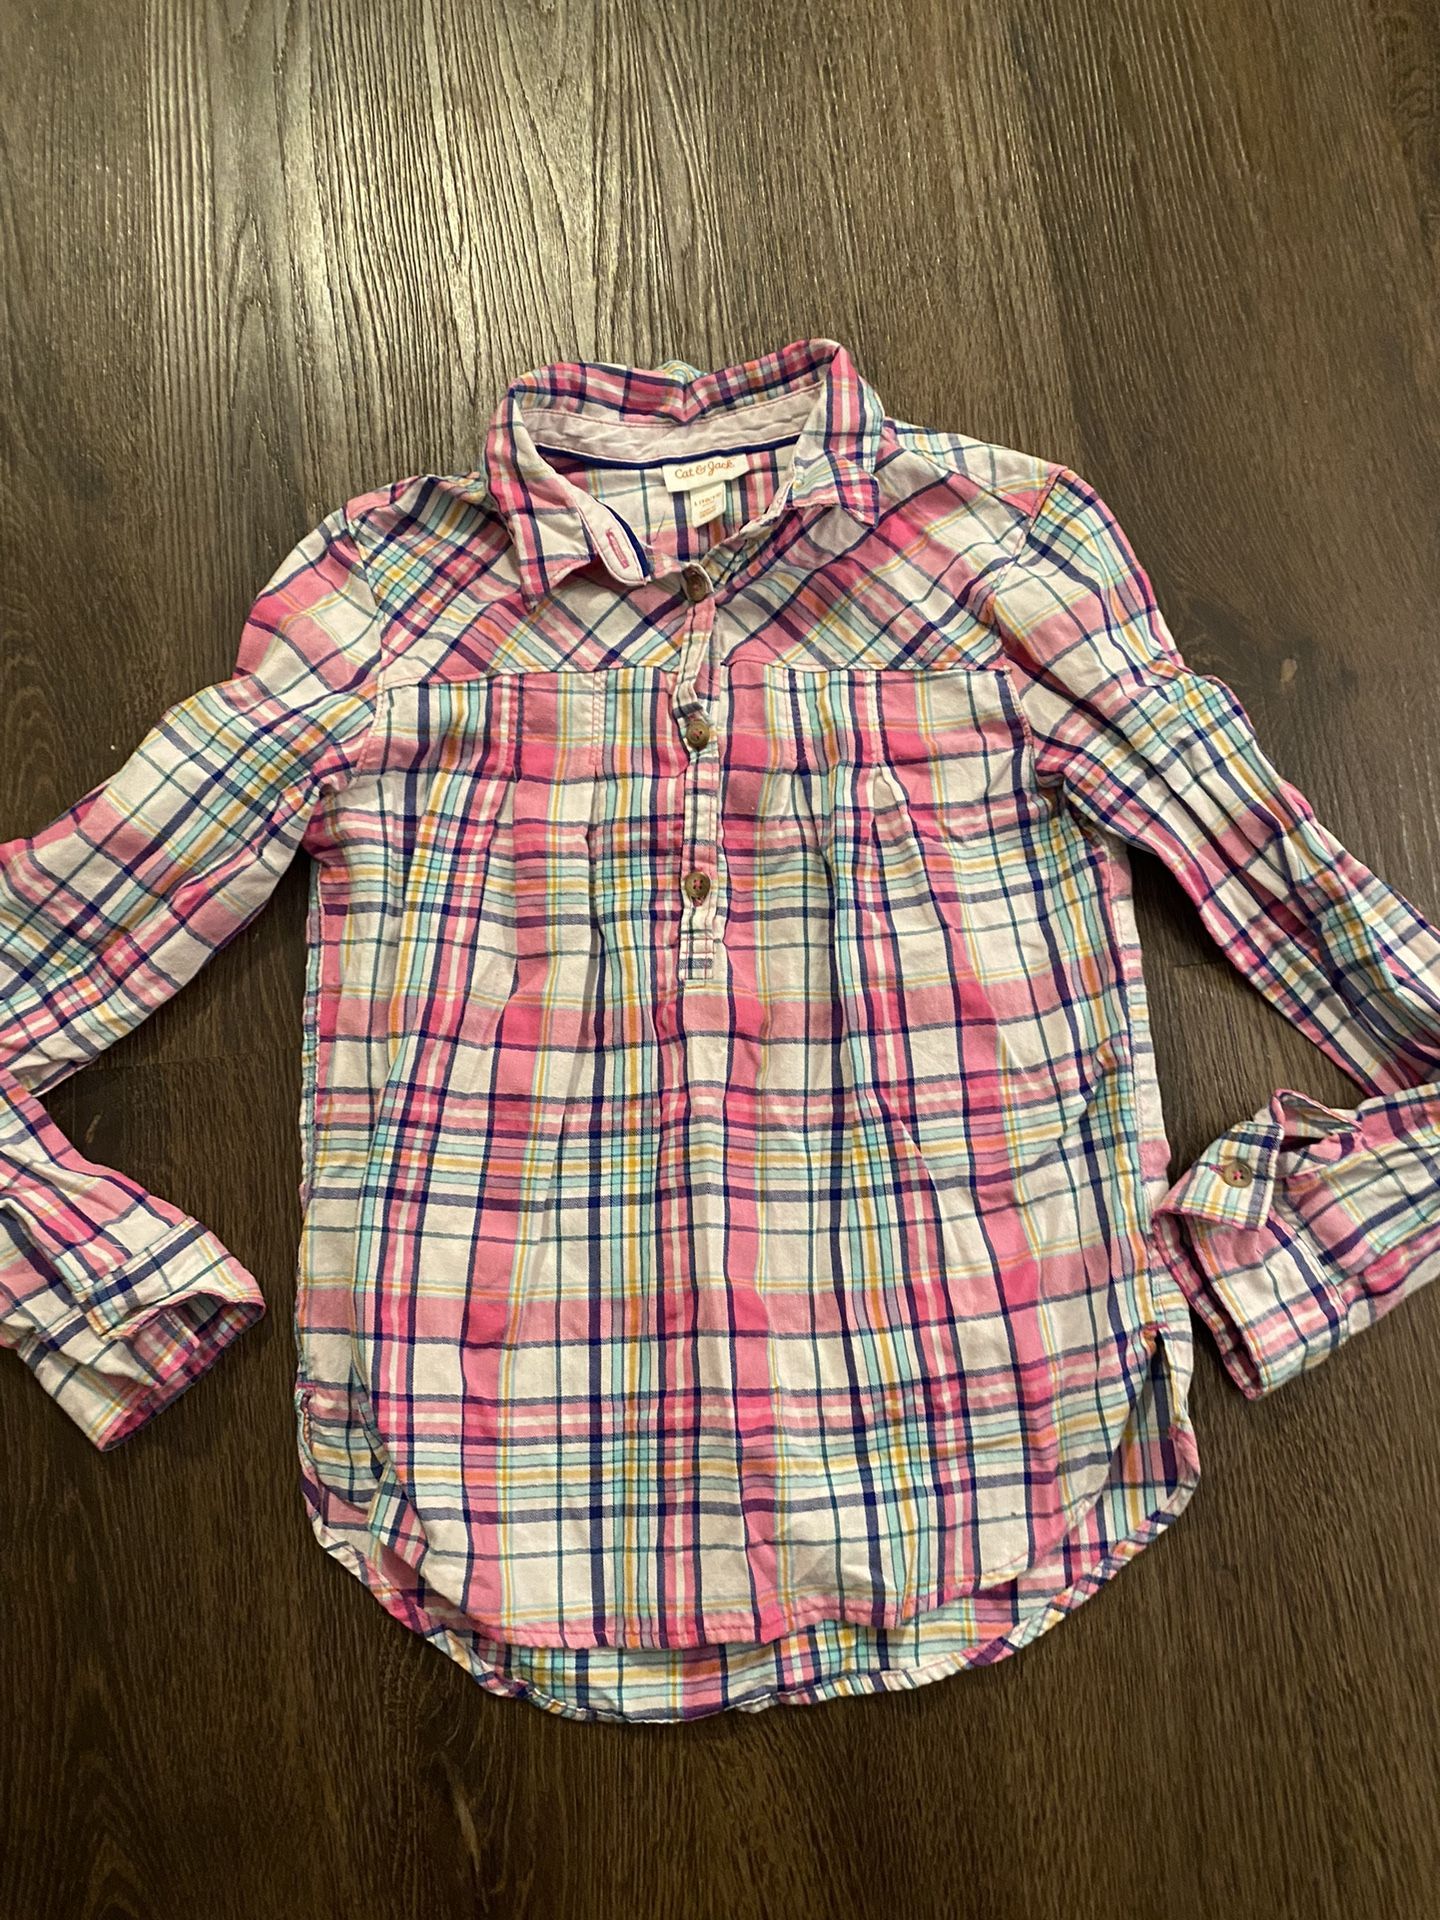 Girls Pink Long Sleeve Plaid Shirt Size 10/12 By Cat & Jack #19